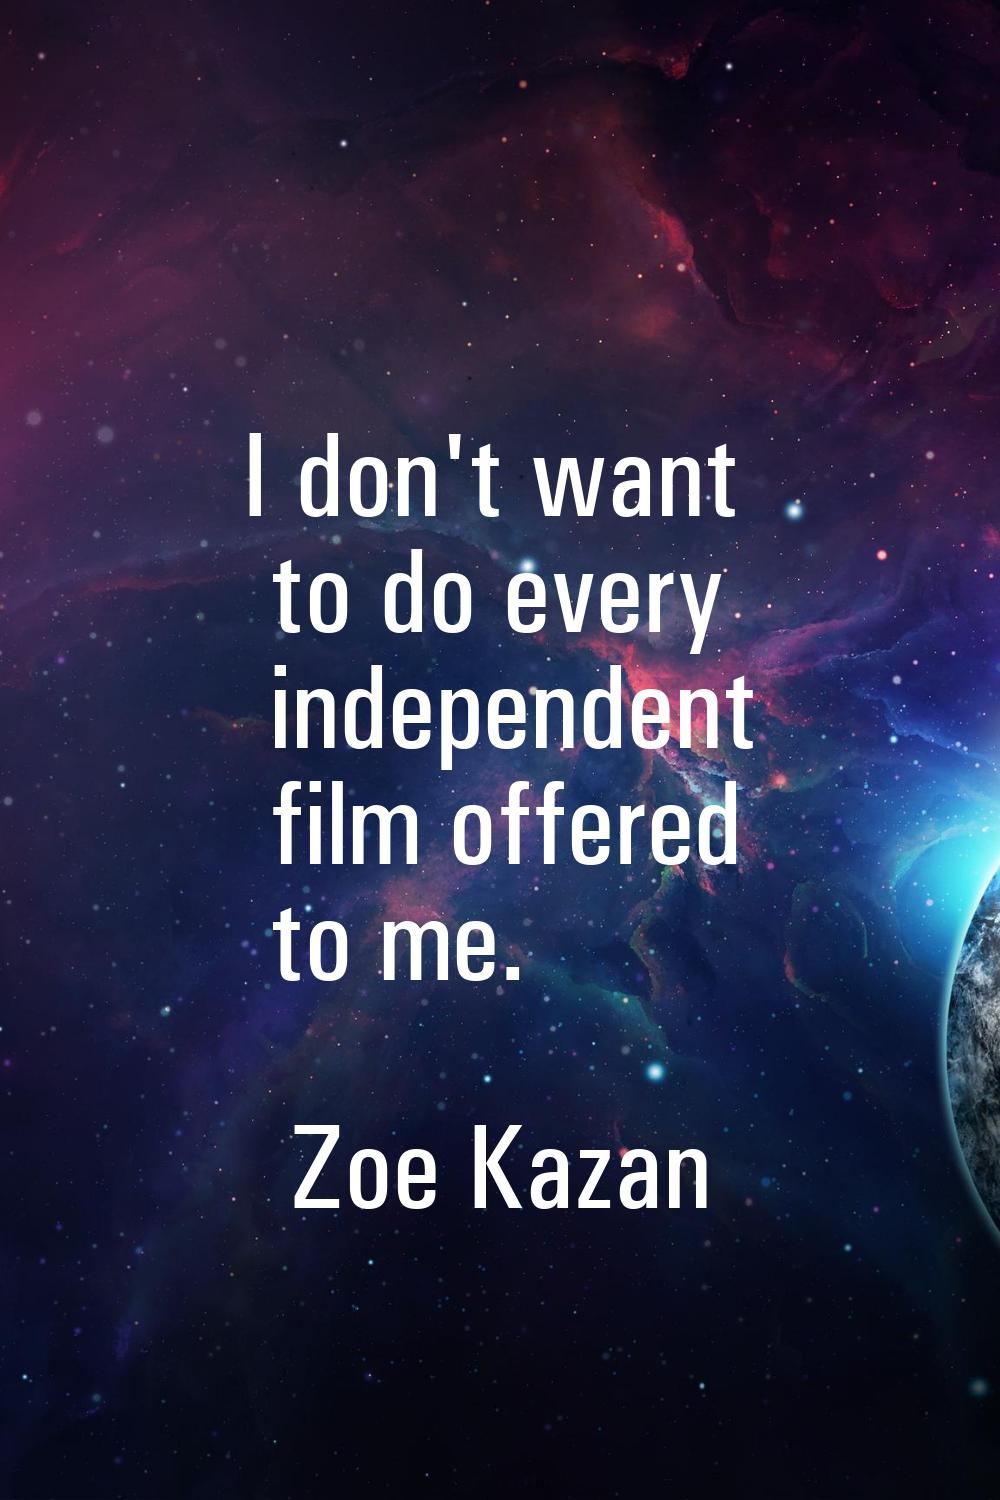 I don't want to do every independent film offered to me.